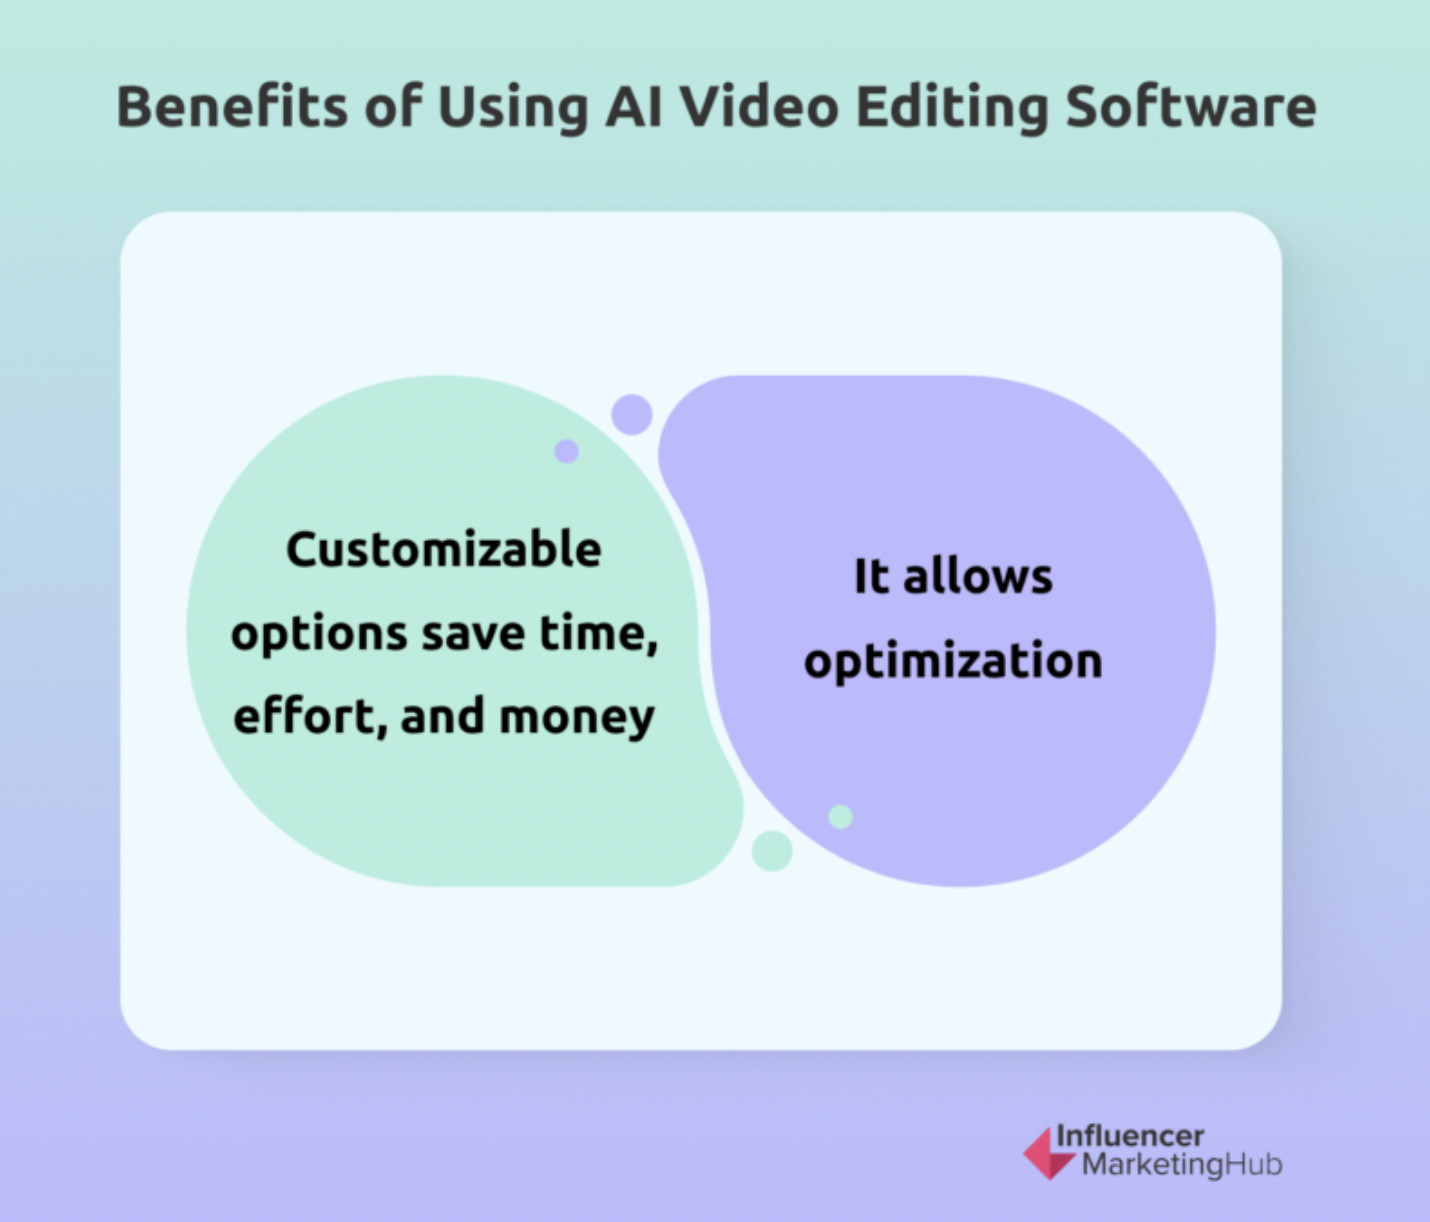 The benefits of using AI video editing software are: customizable, options save time, effort, and money. Also, it allows optimization.